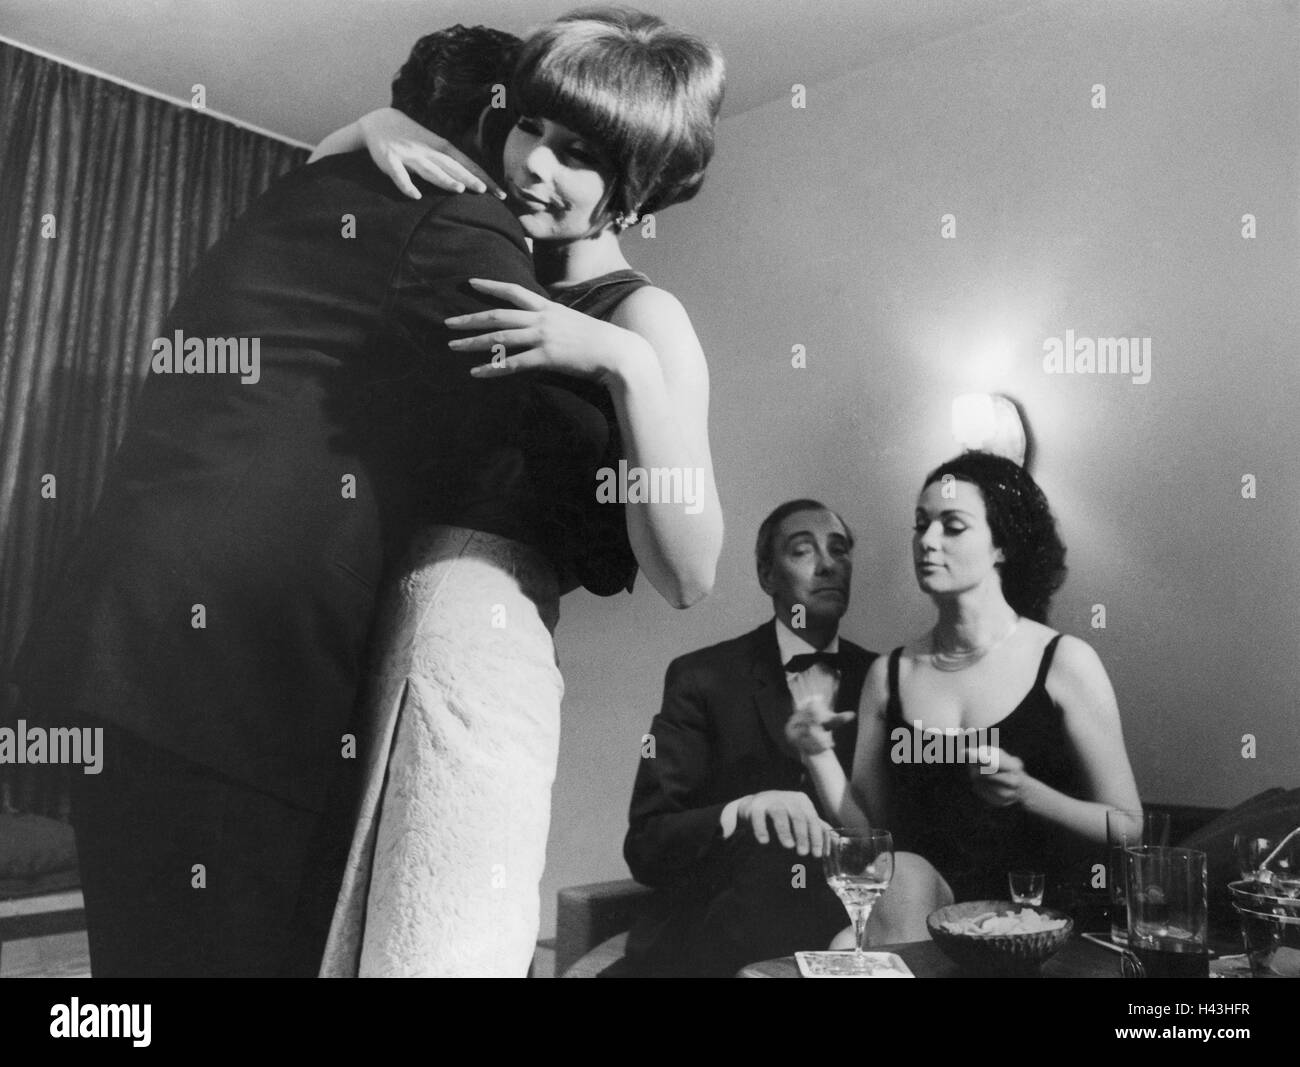 Party, sitting room, couples, elegantly, b/w, people, men, women, friends, hostesses, age difference, friends, evening dress, smartly, elegantly, suit, evening dress, sit, observe, dance, flirtation, embrace, falls in love, drinks, nostalgia, inside, Stock Photo